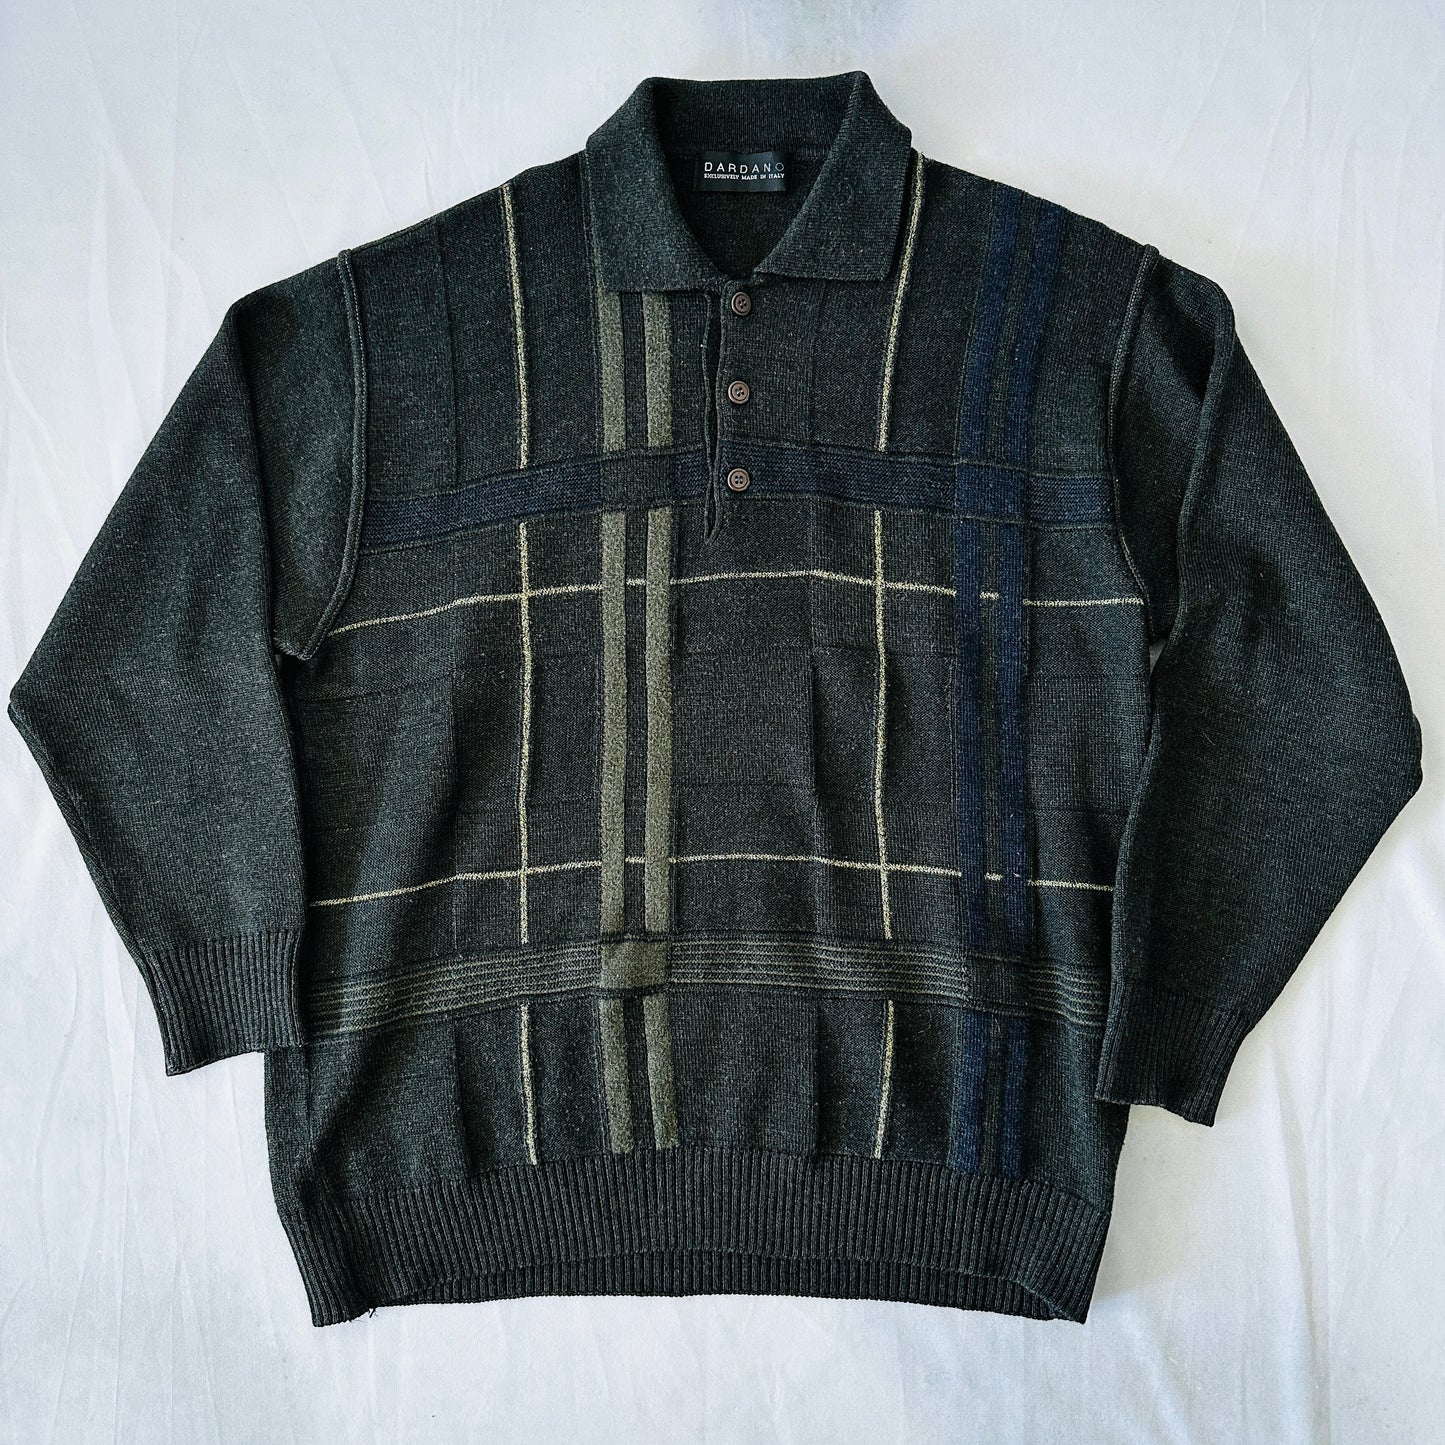 Dardano Vintage Sweater - 52 / L  - Made in Italy